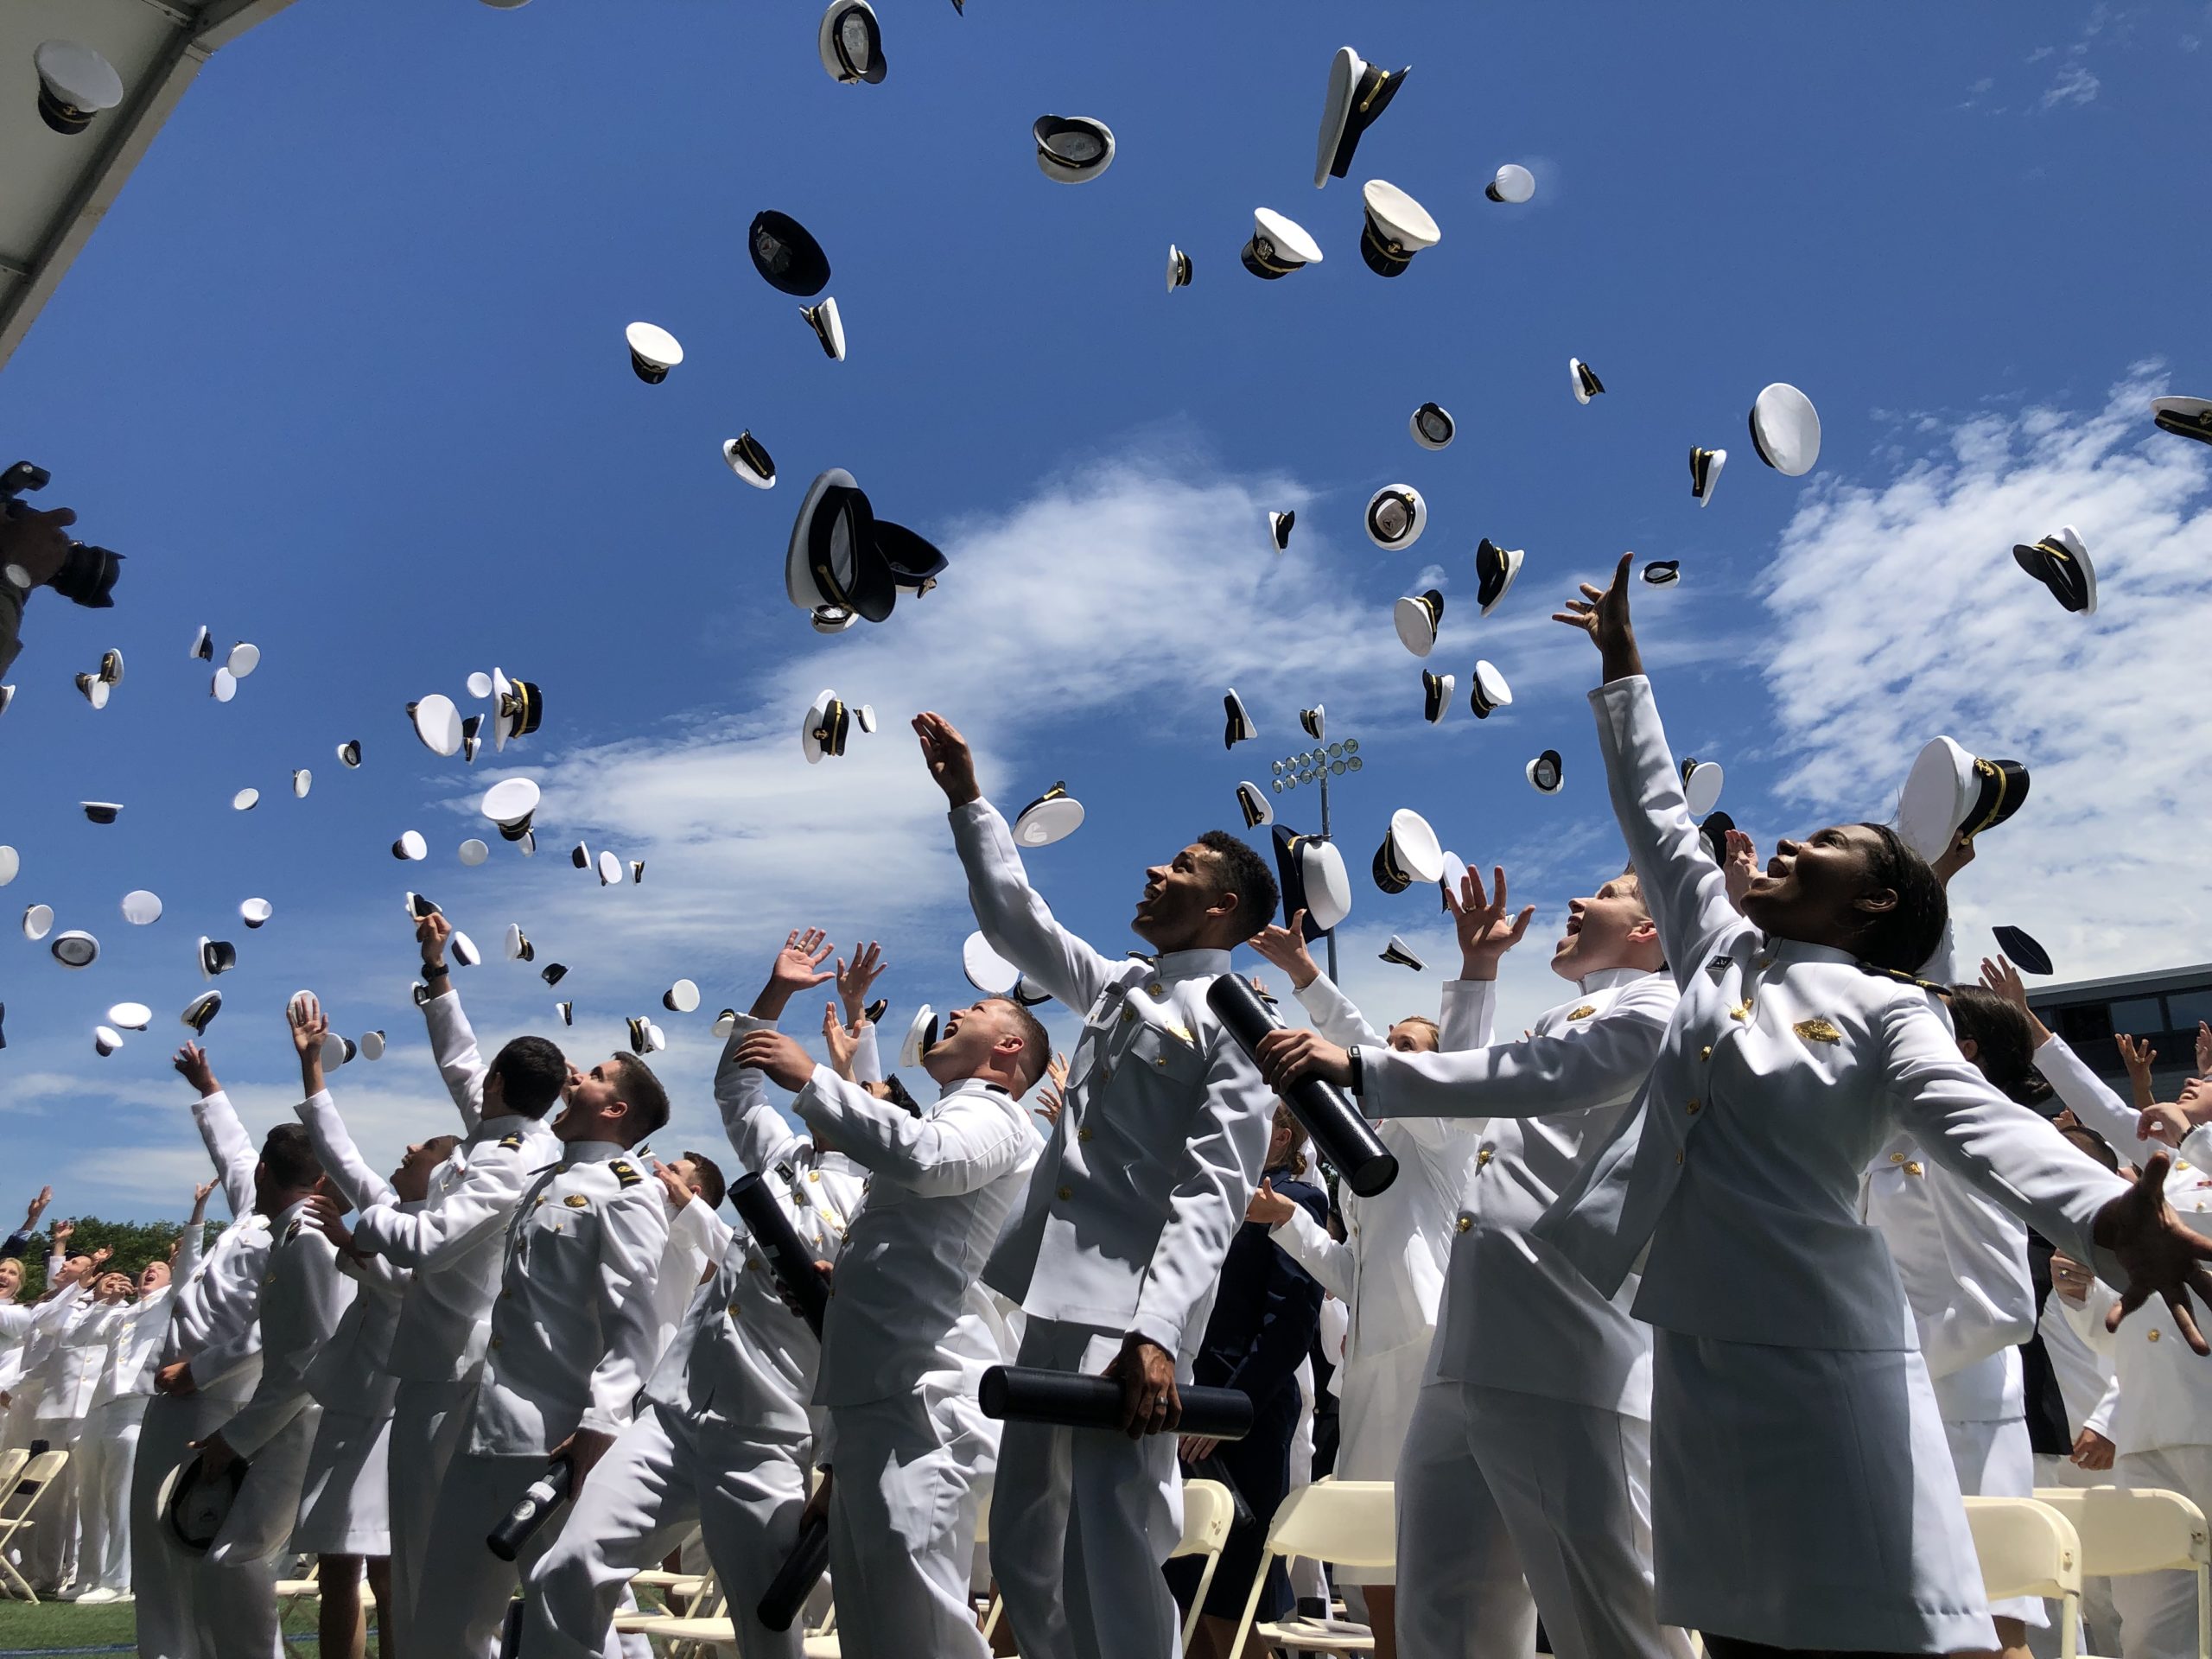 200 graduated from the U.S. Merchant Marine Academy at Kings Point on Saturday. (Photo courtesy of U.S. Merchant Marine Academy)